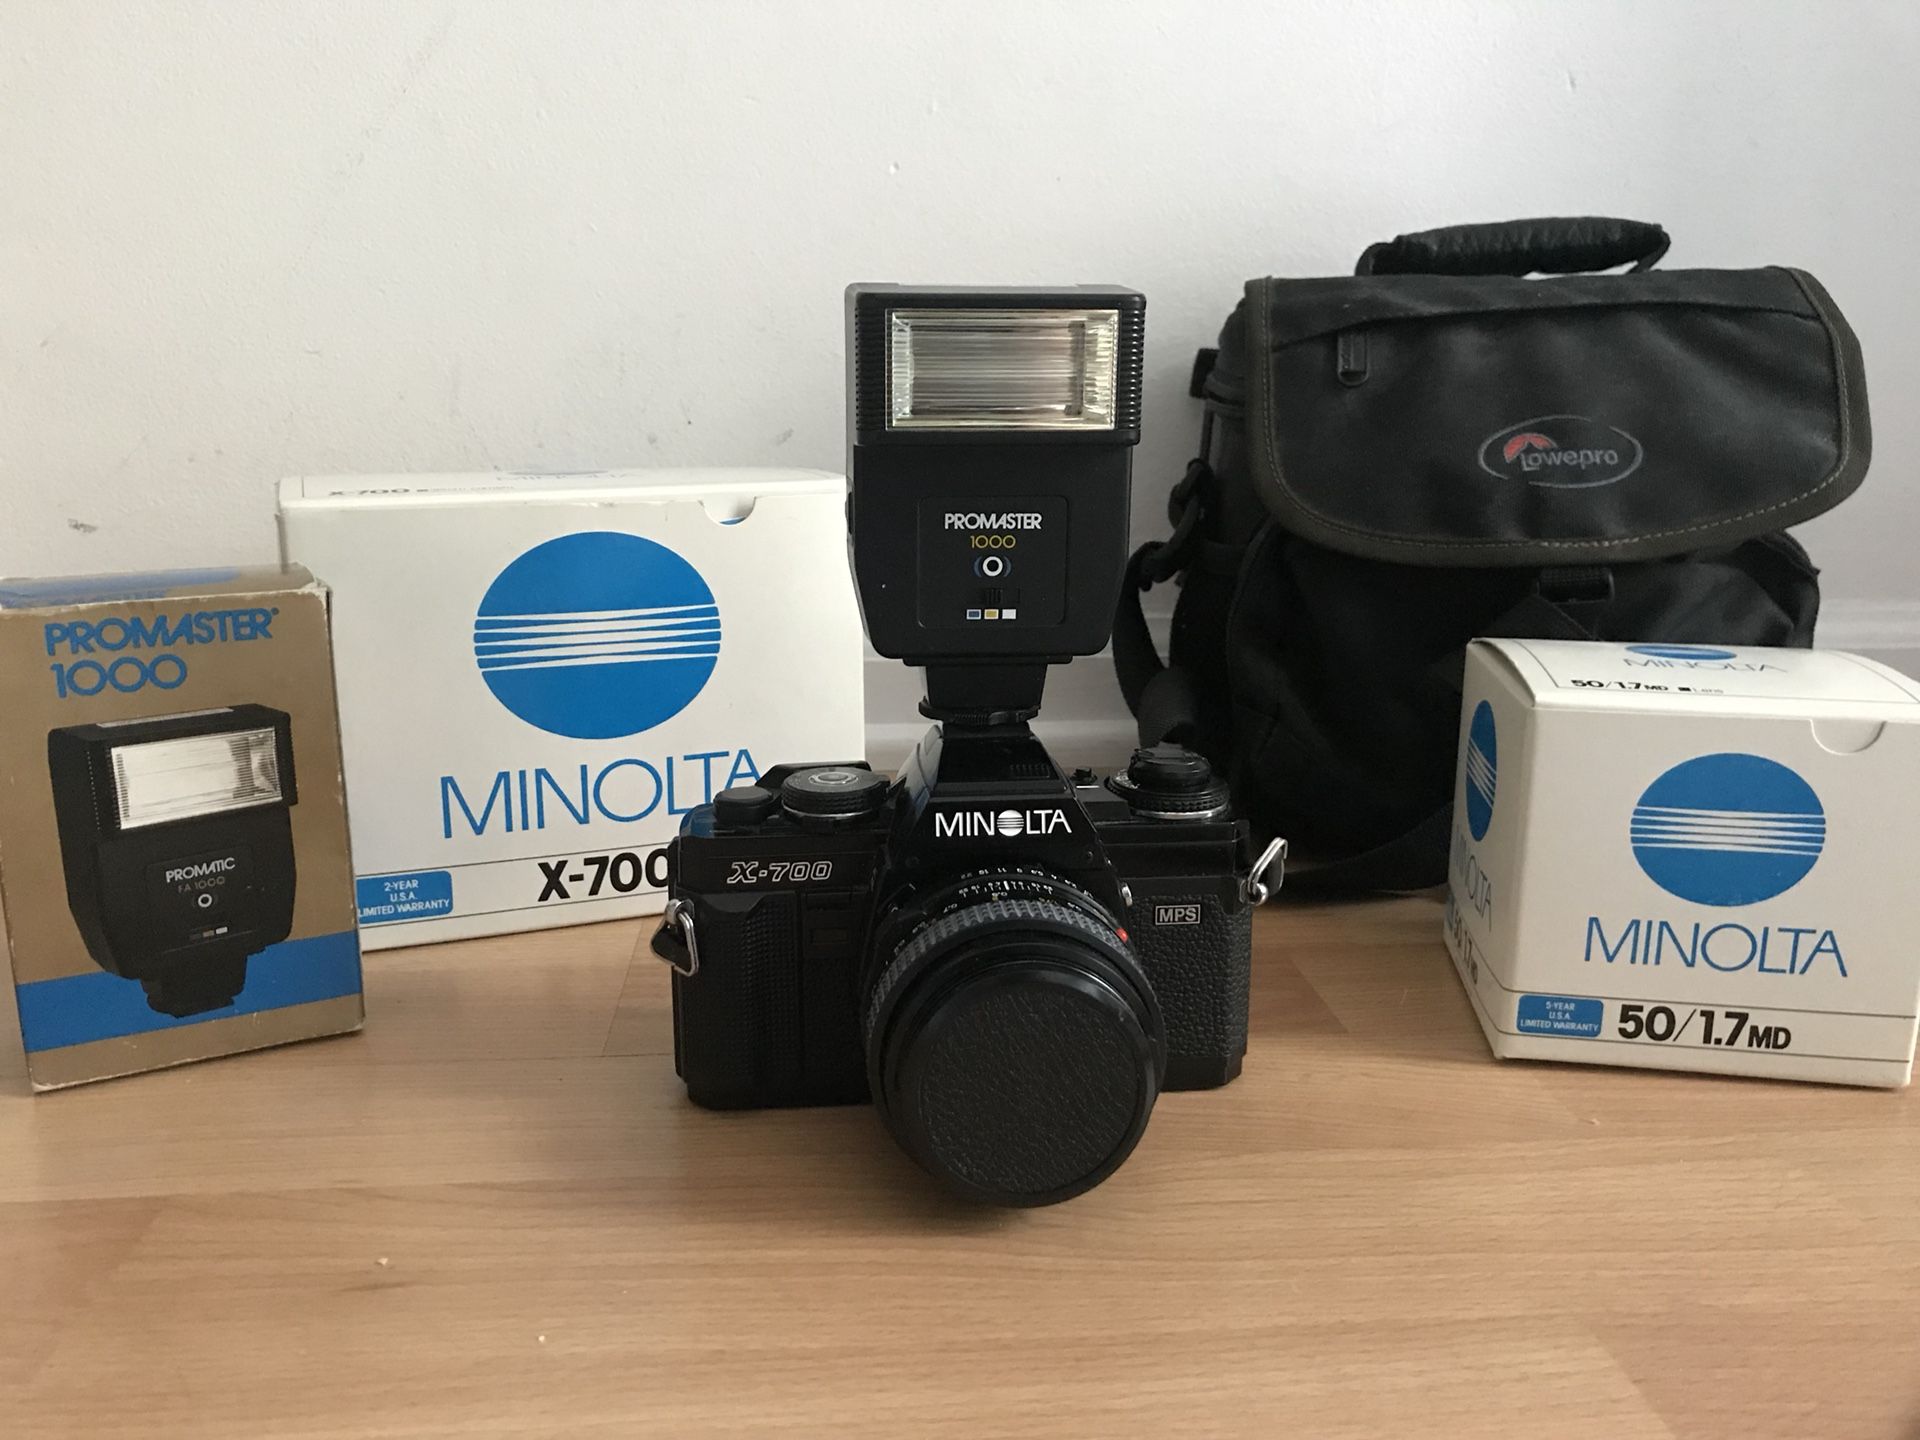 Minolta X-700 Film Camera with 50mm f/1.7 Manual Focus Lens and Promaster Automatic Flash